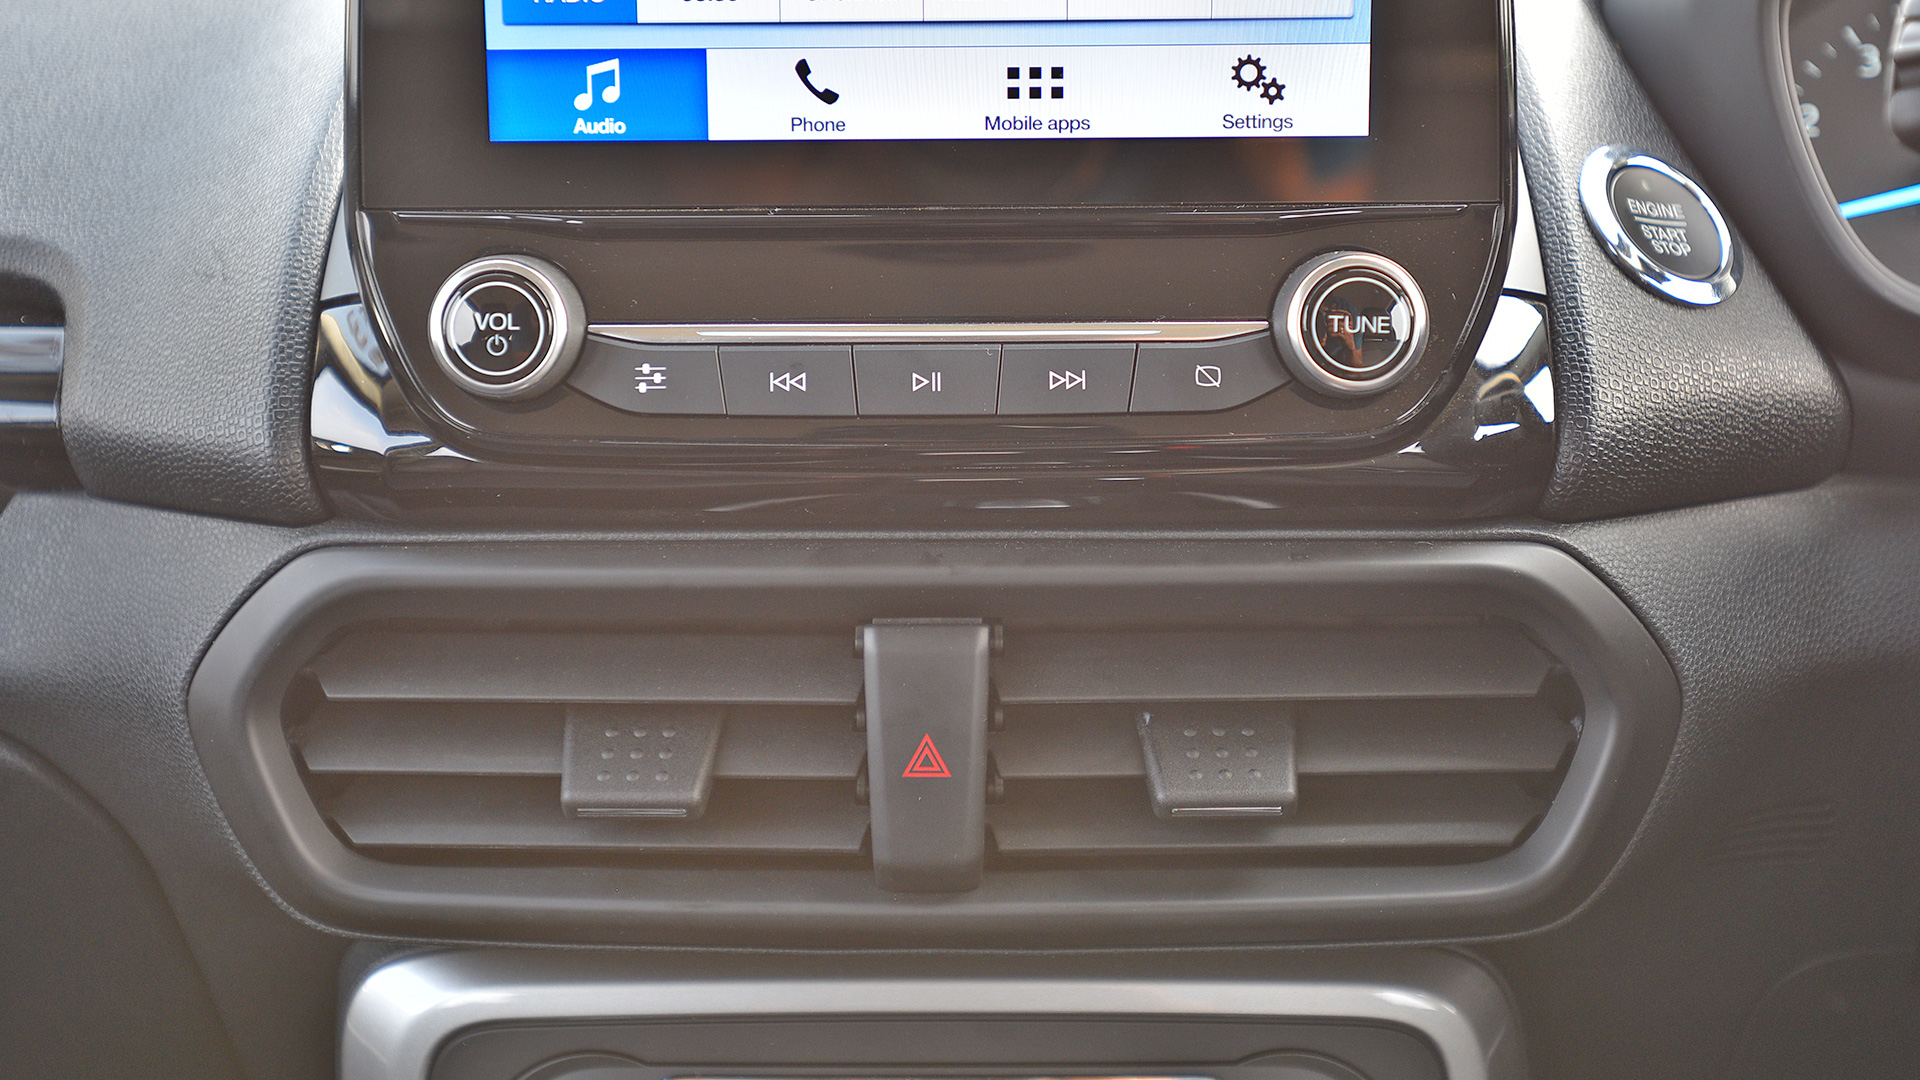 Ford EcoSport () Interior Layout, Dashboard & Infotainment Parkers